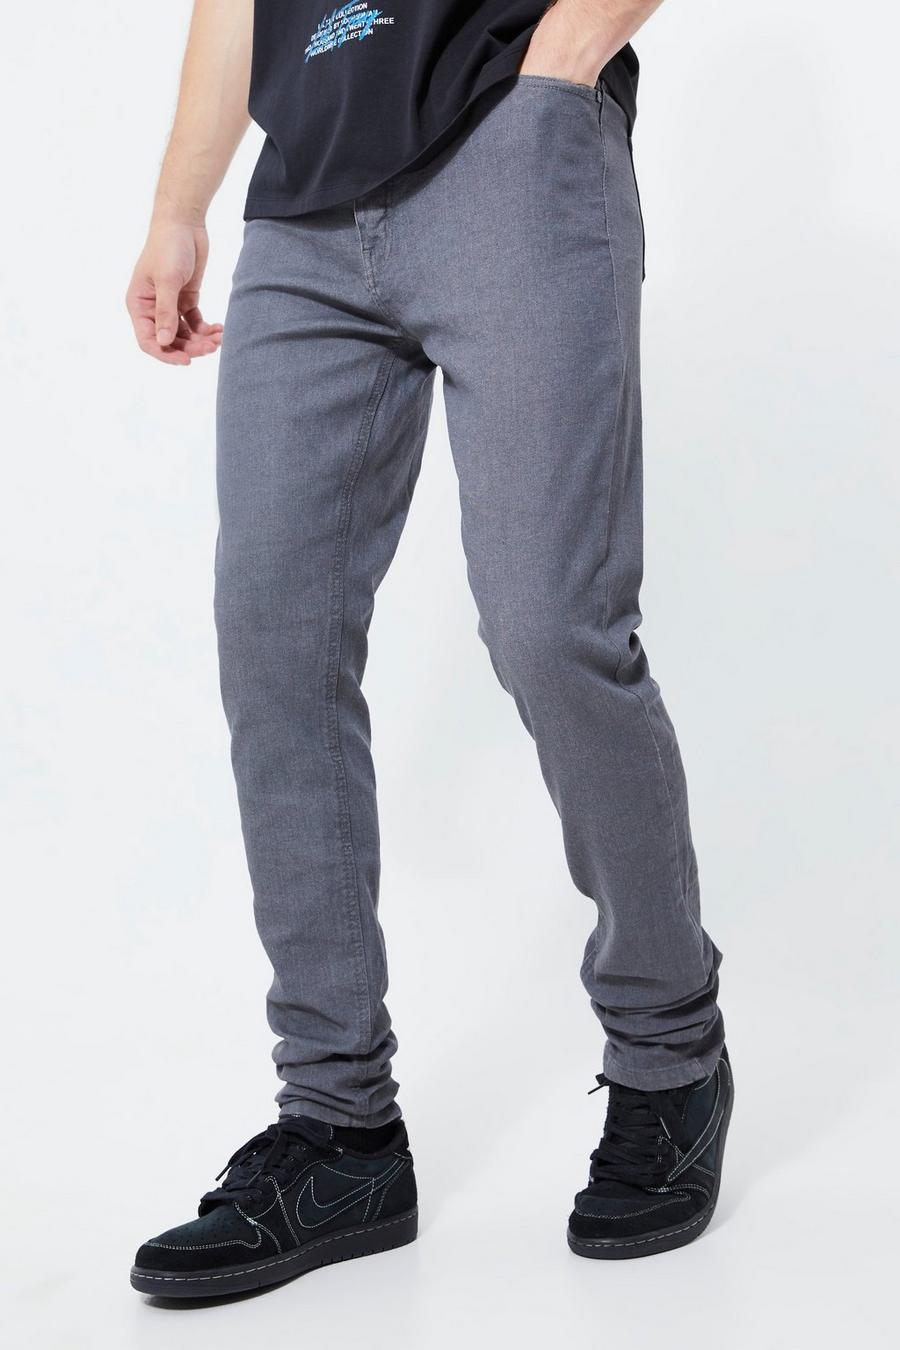 Grey Tall Skinny Stacked Zip Gusset Coated Jean